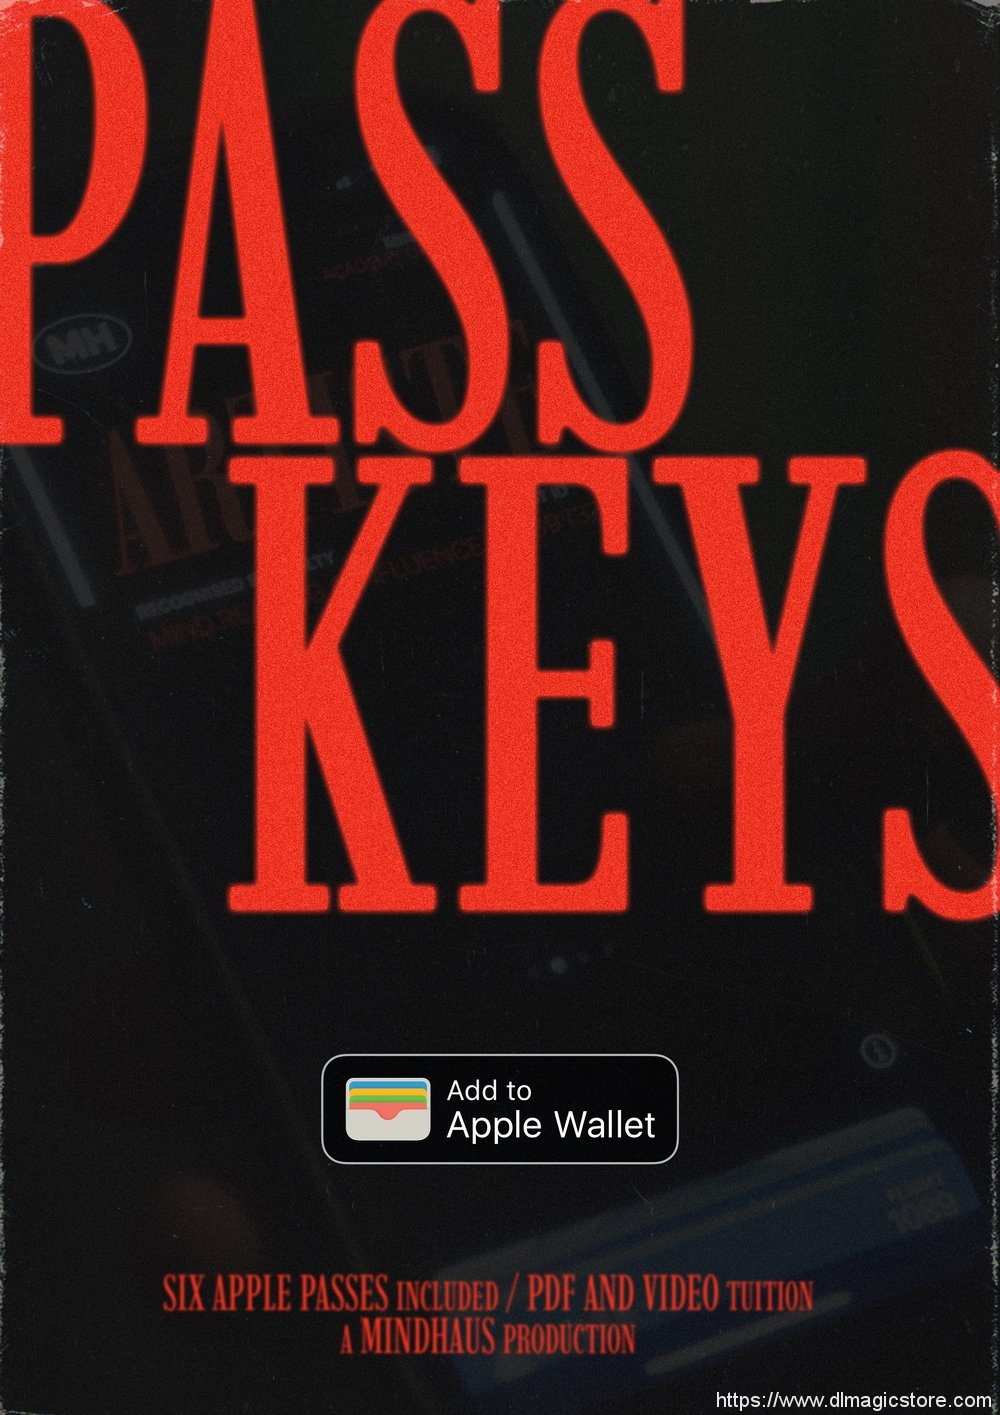 Passkeys By Lewis Le Val